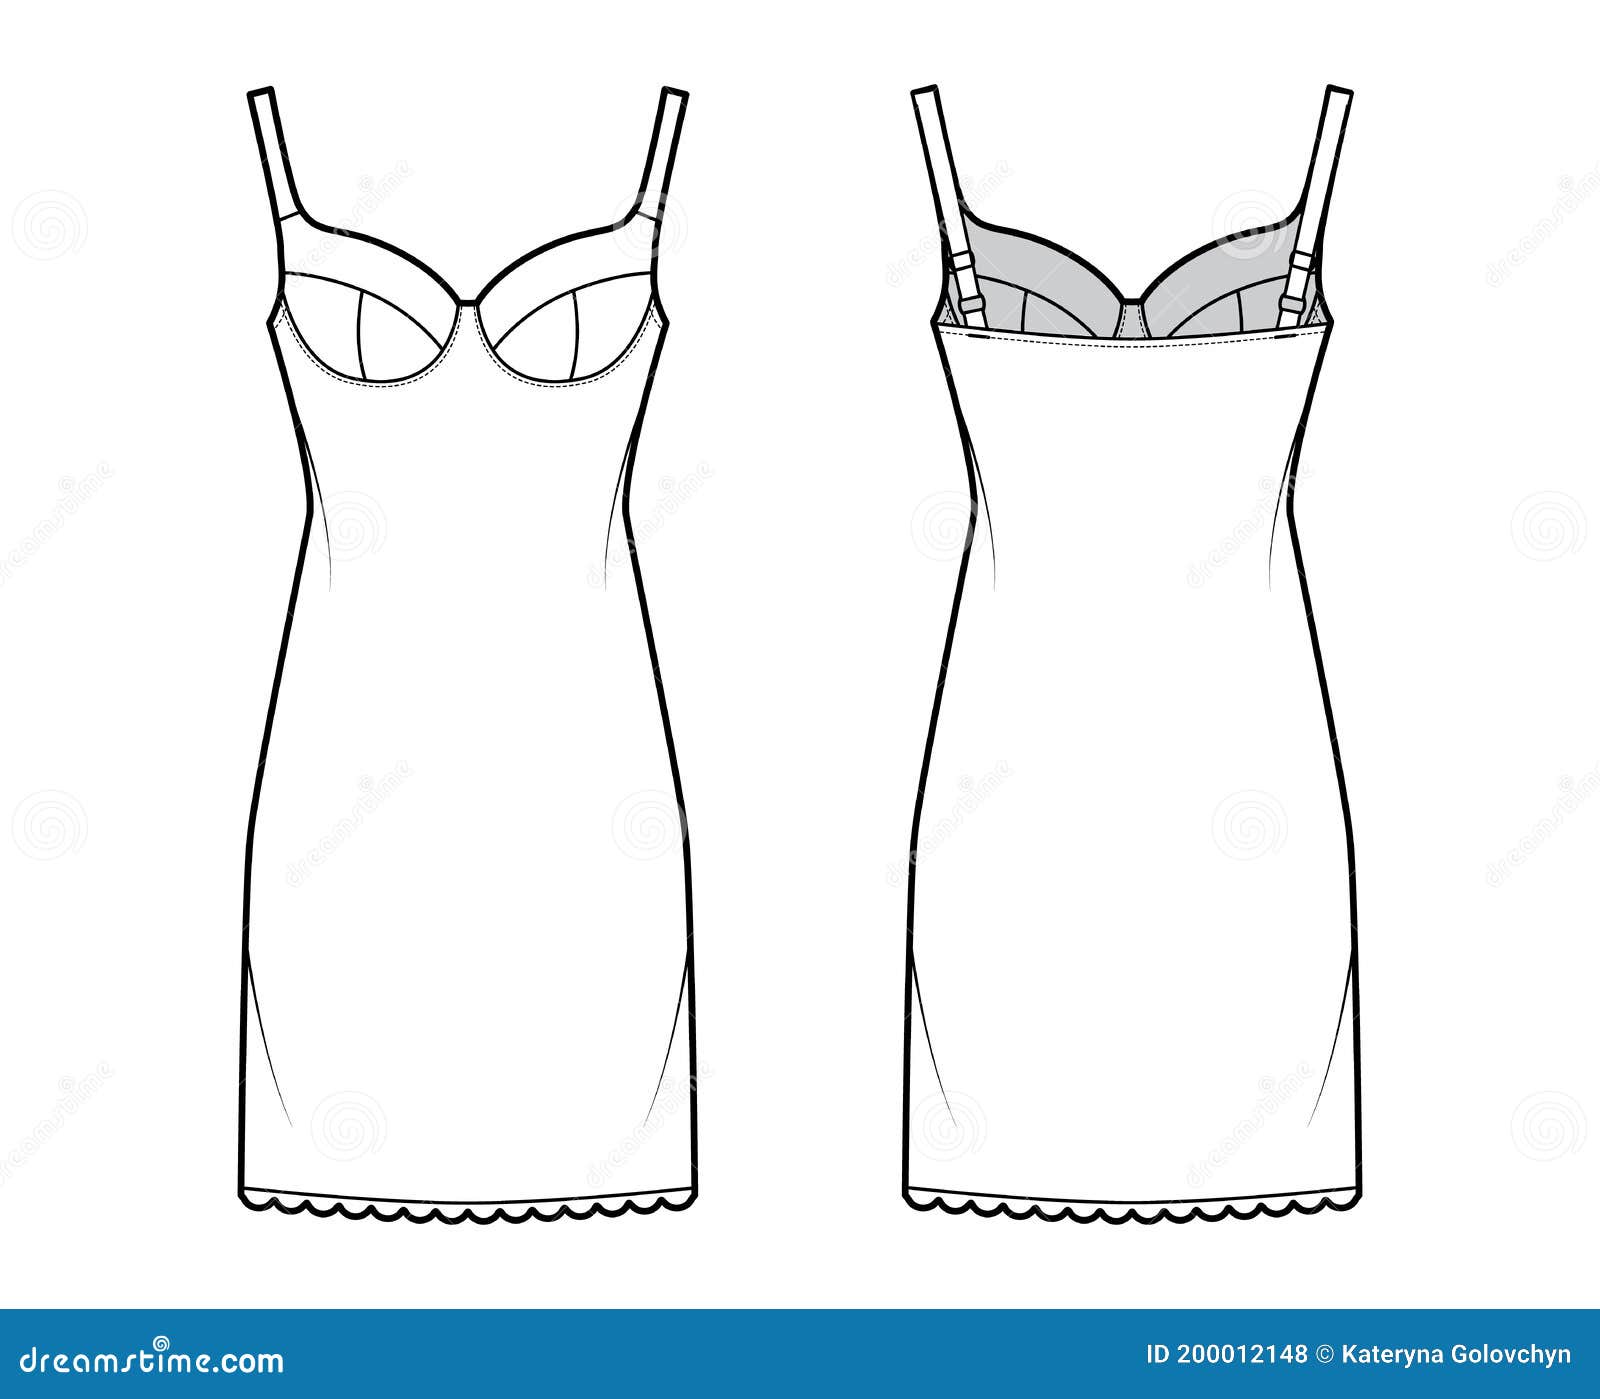 Bra Slip Lingerie Dress Technical Fashion Illustration With Molded Cup ...